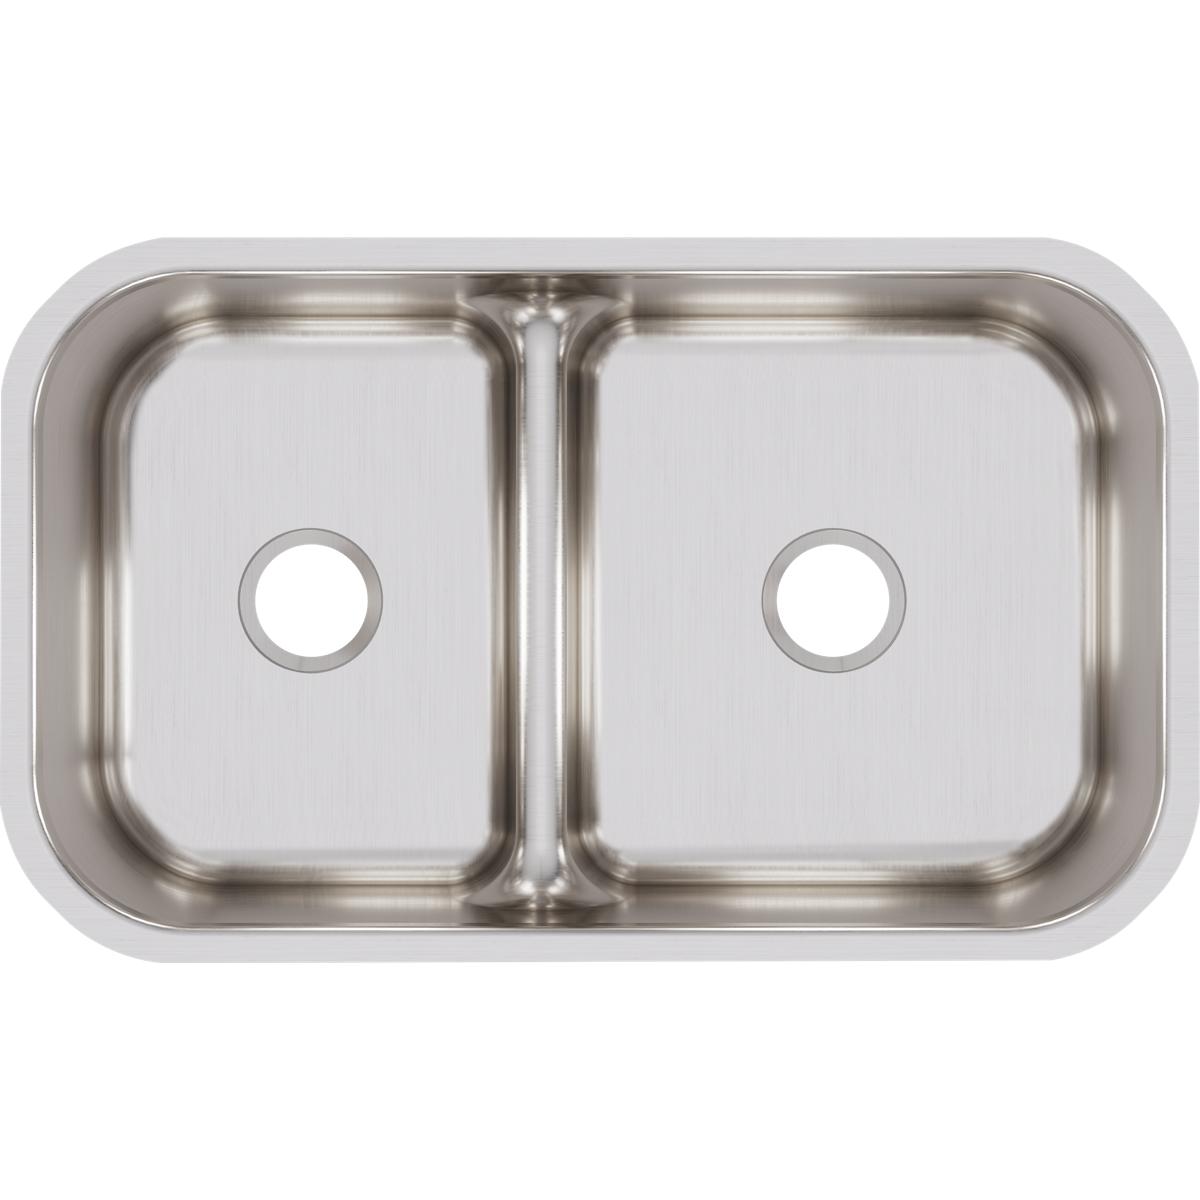 Elkay Lustertone Classic Stainless Steel 34-5/8" x 21-1/8" x 8-3/4" 40/60 Double Bowl Undermount Sink with Aqua Divide